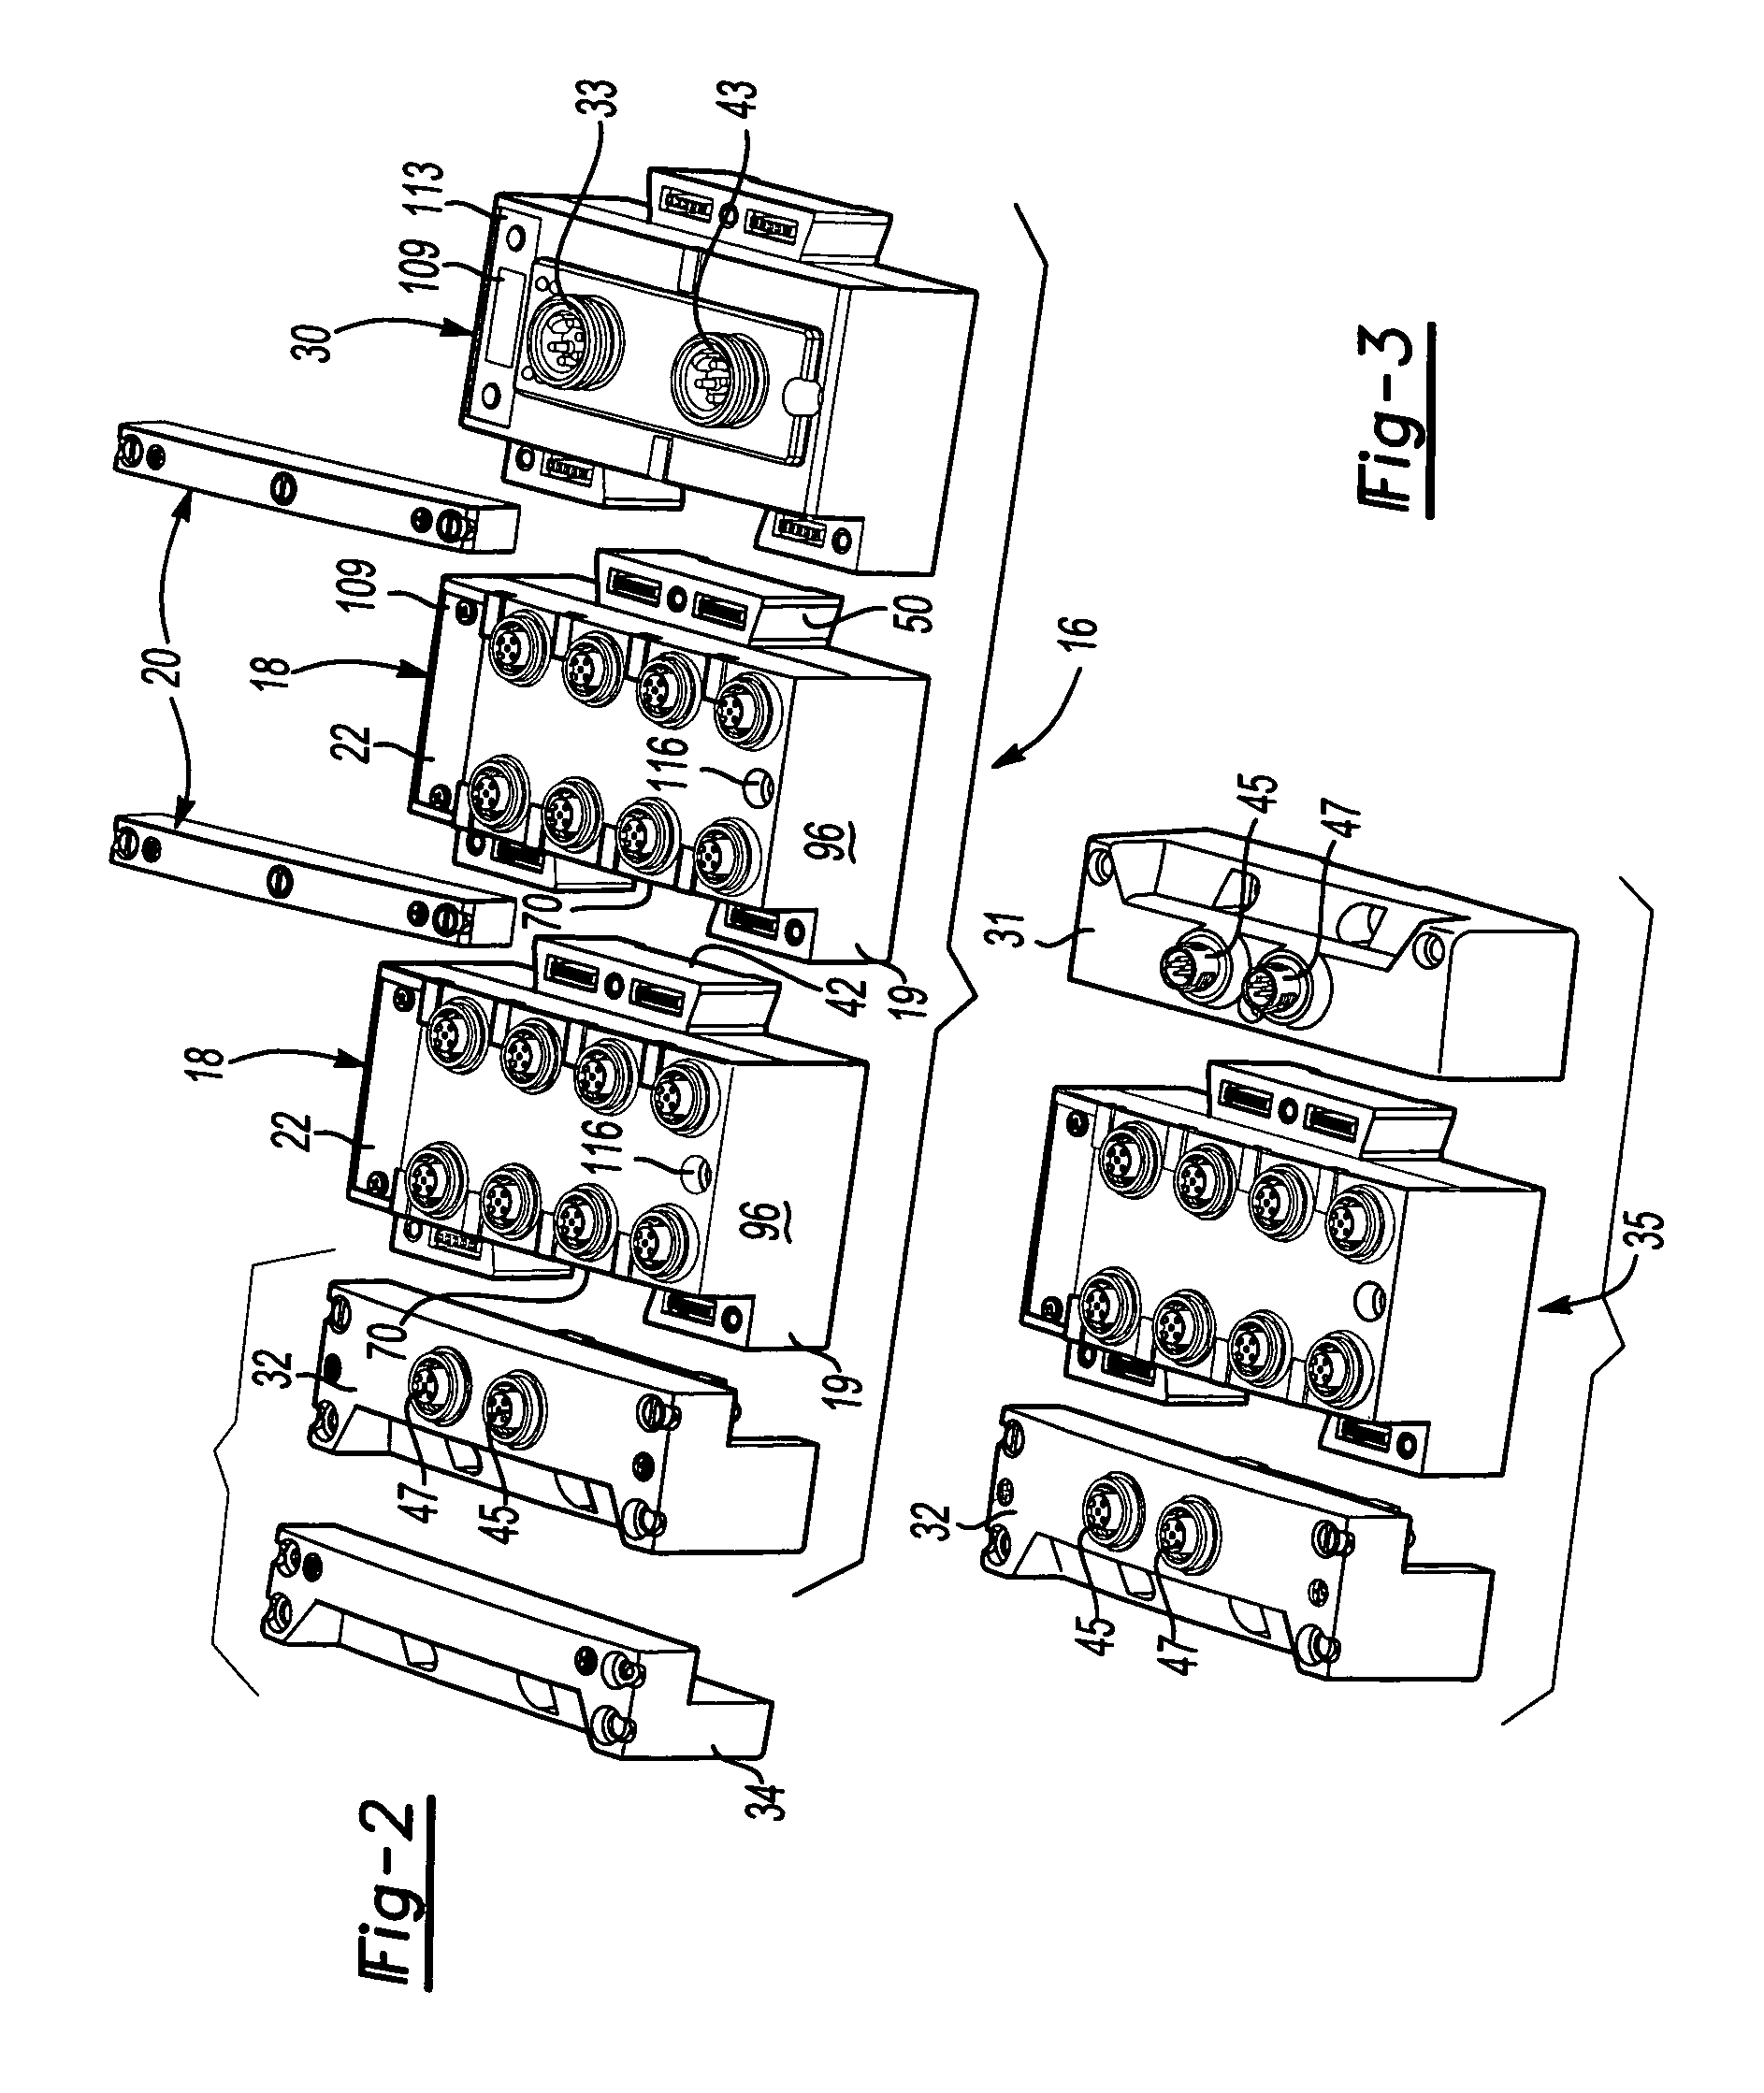 Modular electrical bus system with built in ground circuit